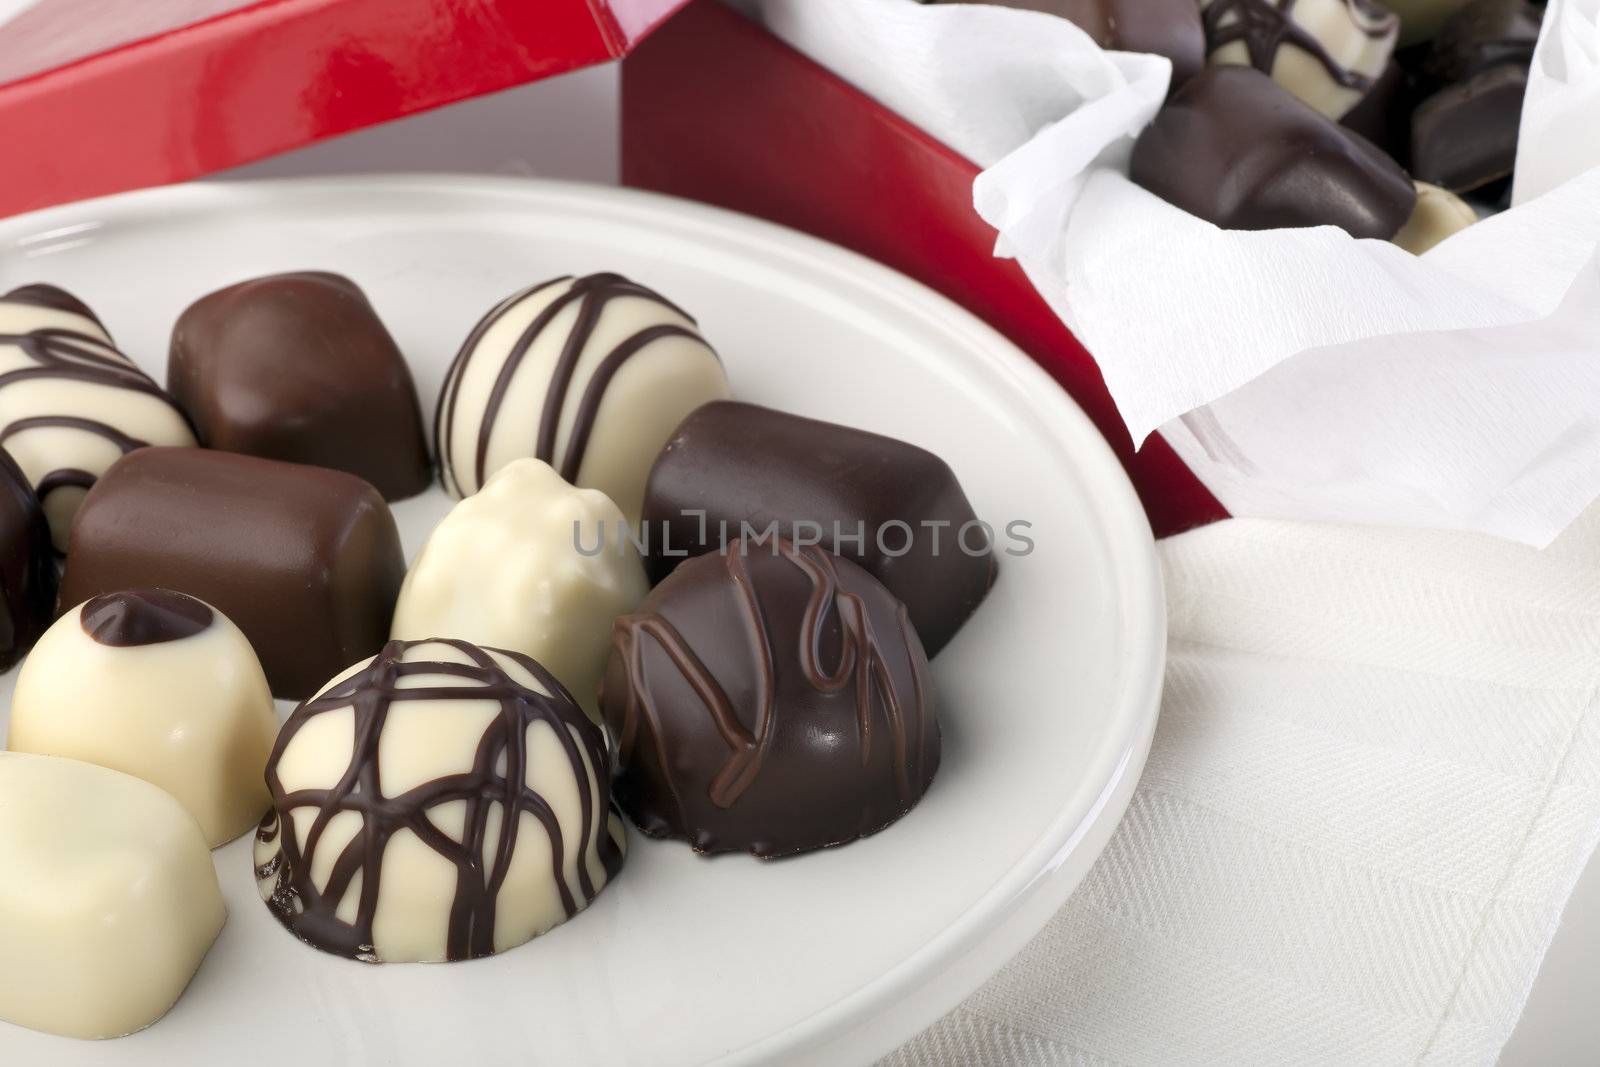 Assortment of gourmet Belgium chocolates on white plate with red gift box.